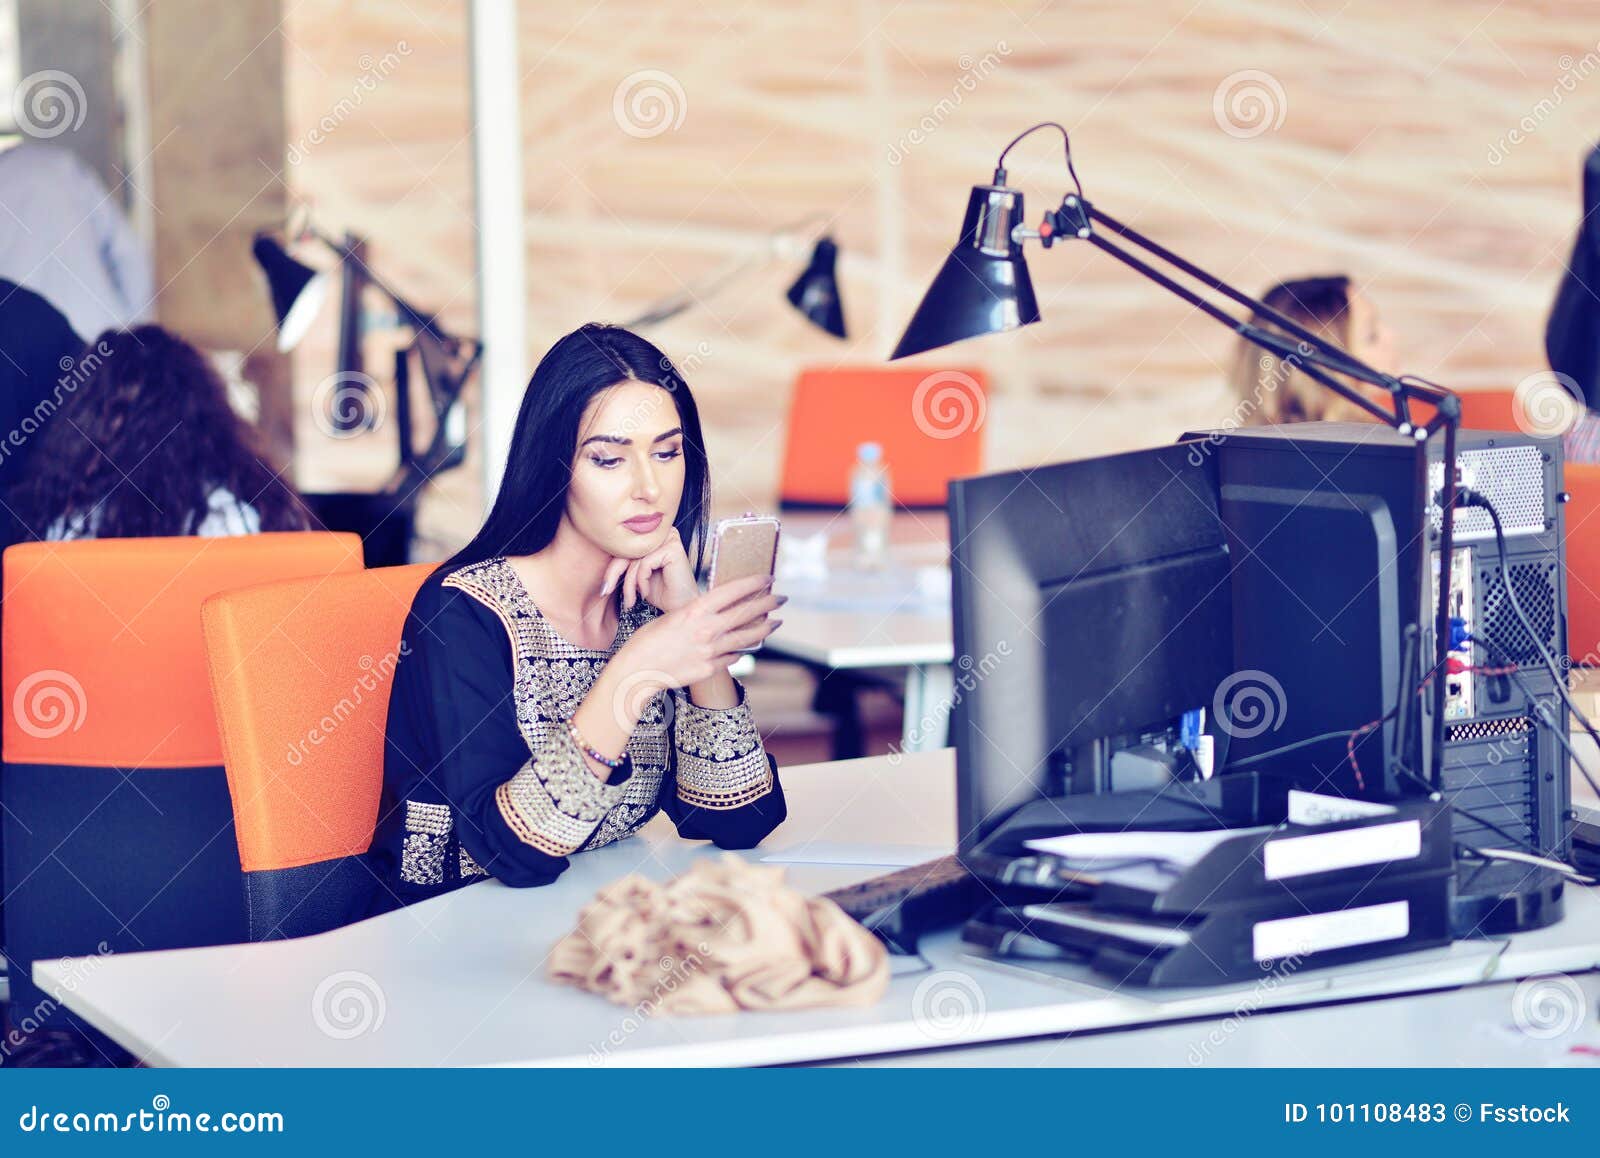 Portrait Of Young Bored Attractive Woman At Office Desk With